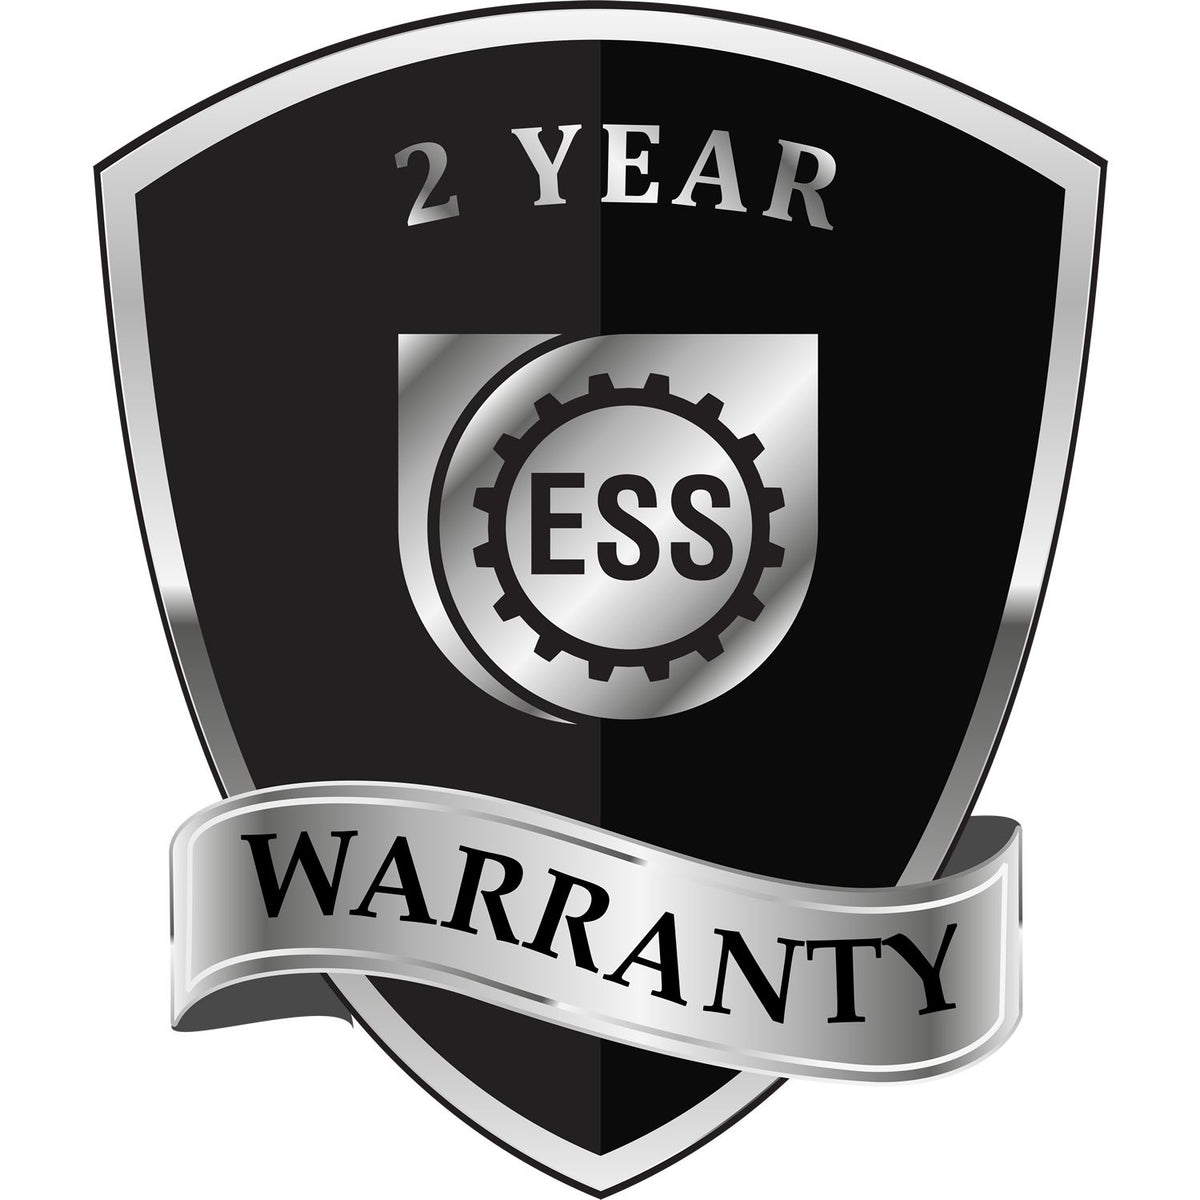 A badge or emblem showing a warranty icon for the Long Reach District of Columbia PE Seal